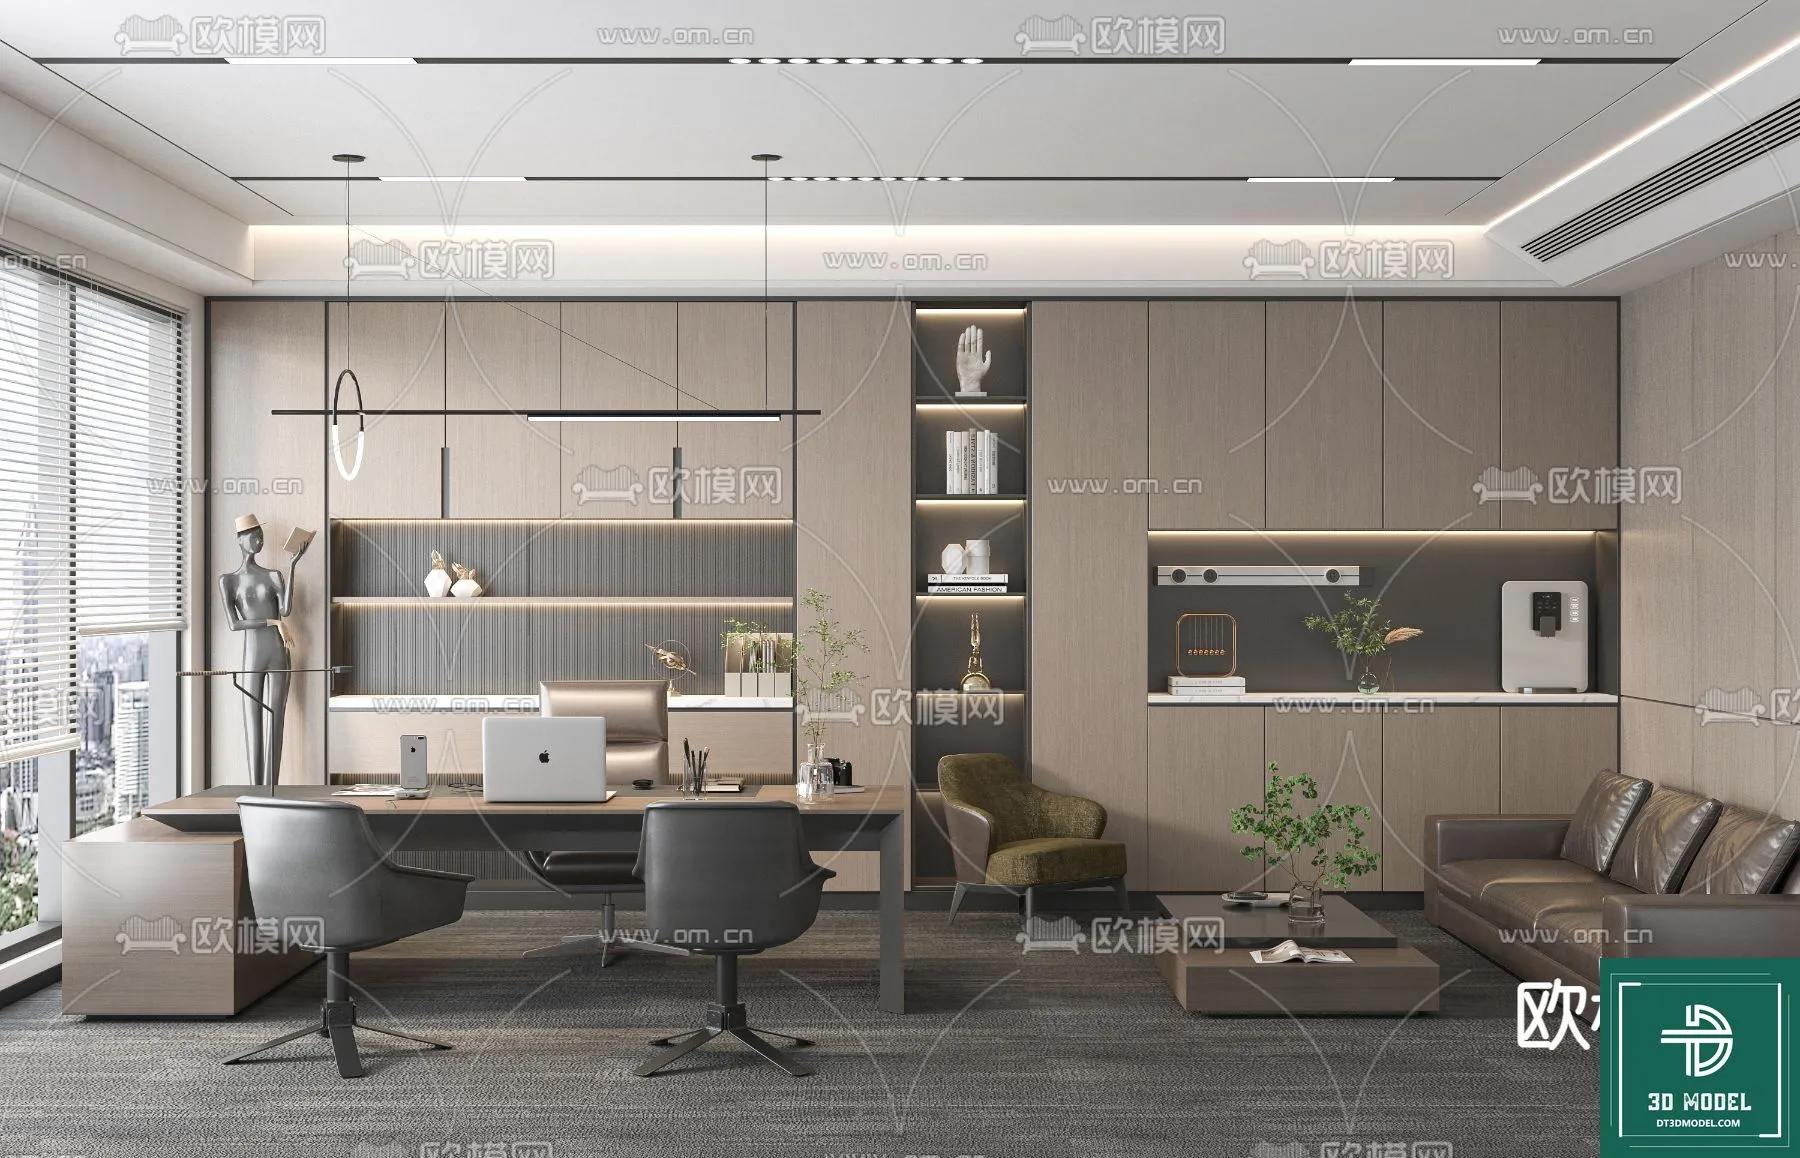 OFFICE ROOM FOR MANAGER – 3DMODEL – 099